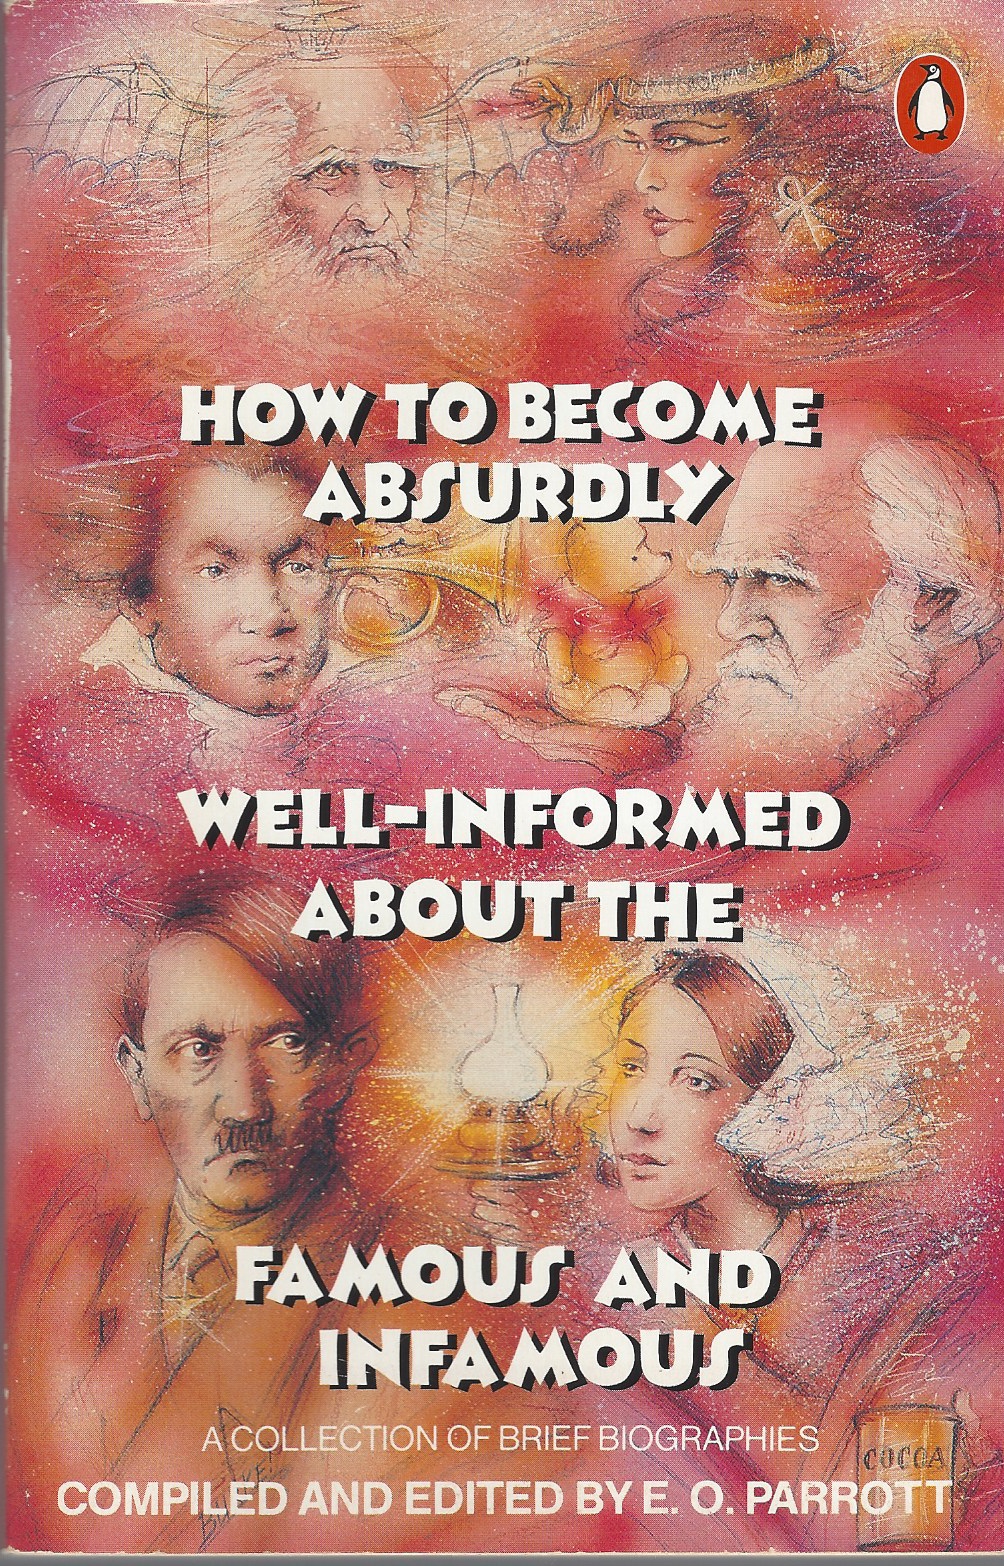 PARROTT E. 0. - How to Become Absurdly Well Informed About the Famous and Infamous